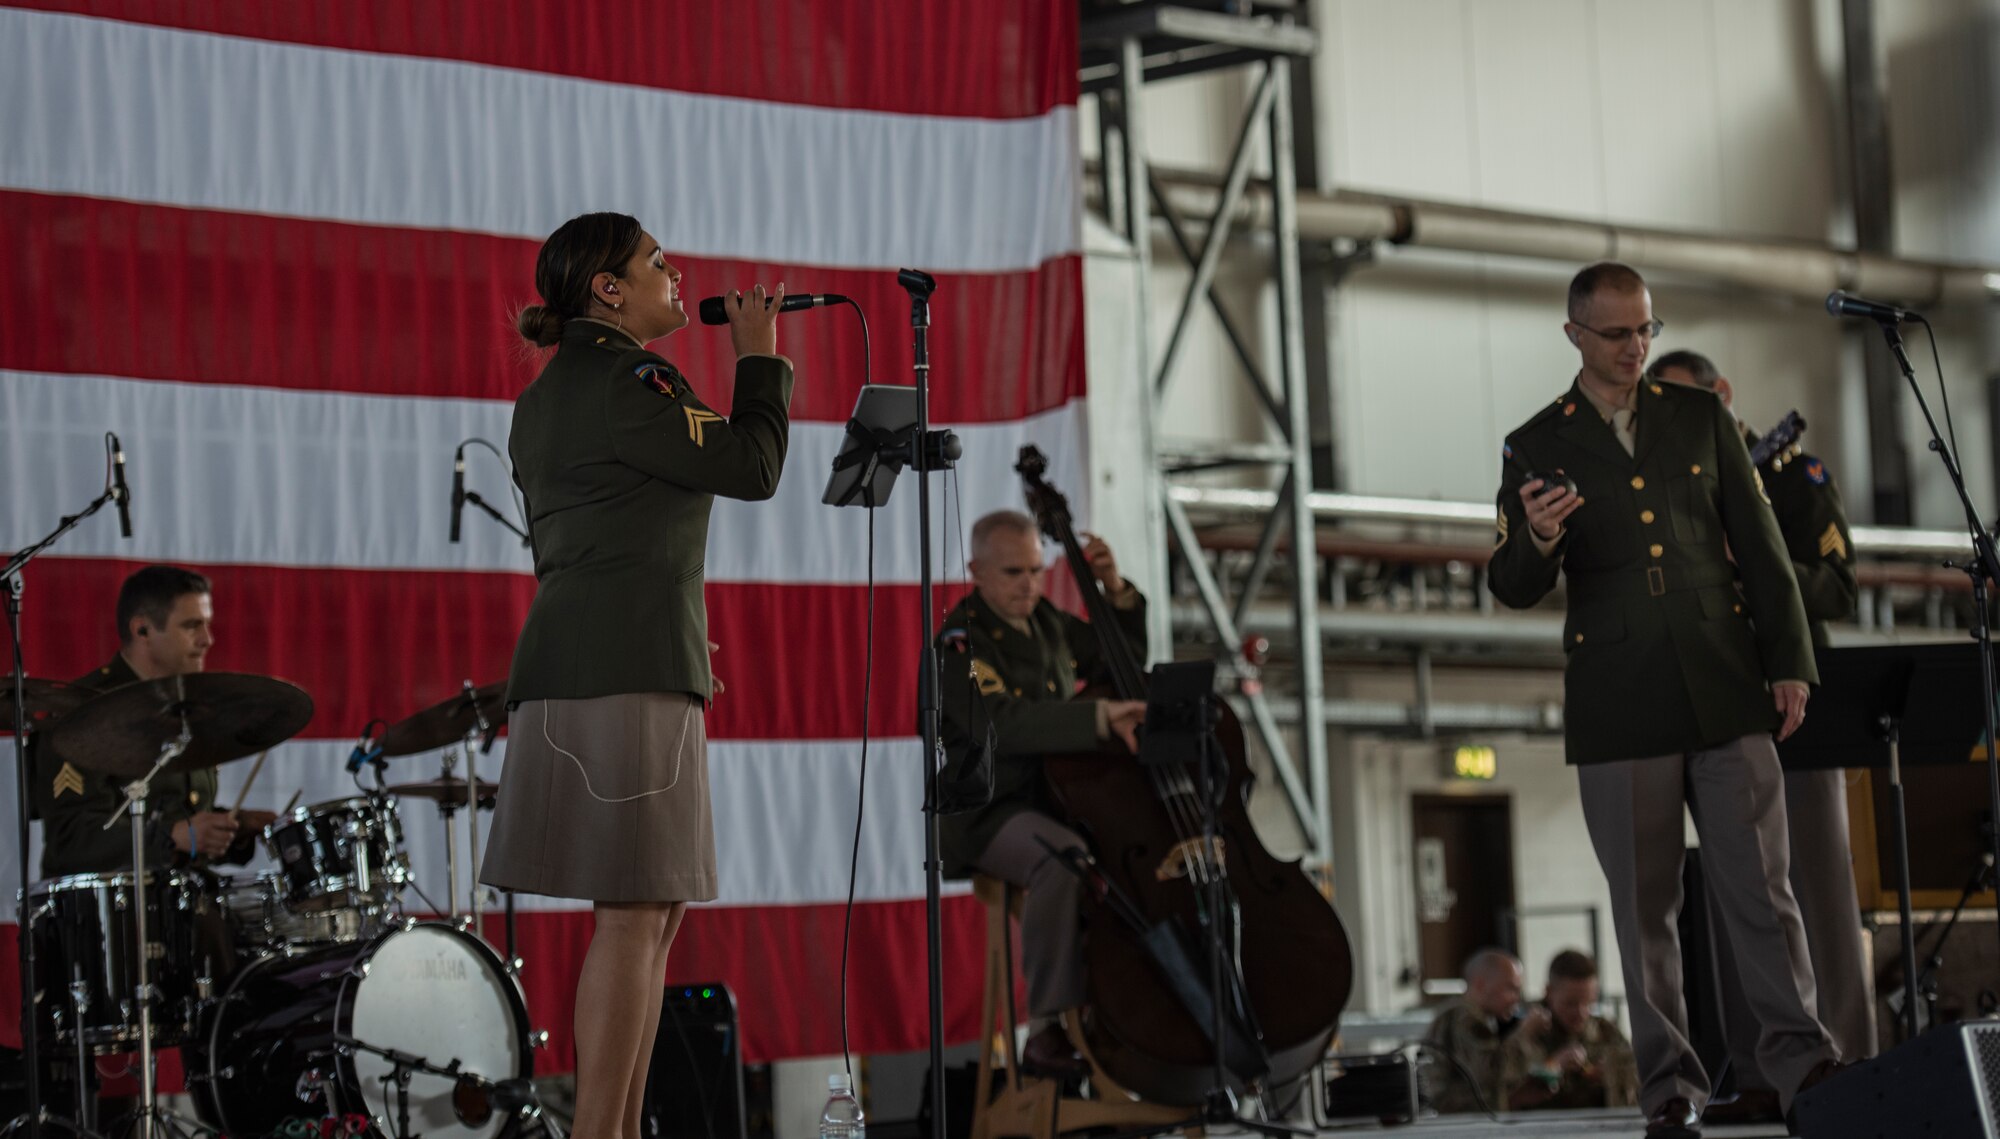 U.S. Air Force Staff Sgt. Linda Casul and Master Sgt. Clint Whitney, vocalists for the United States Air Forces in Europe Band, perform during the 73rd Air Force Birthday Celebration at Ramstein Air Base, Germany, Sept. 18, 2020.